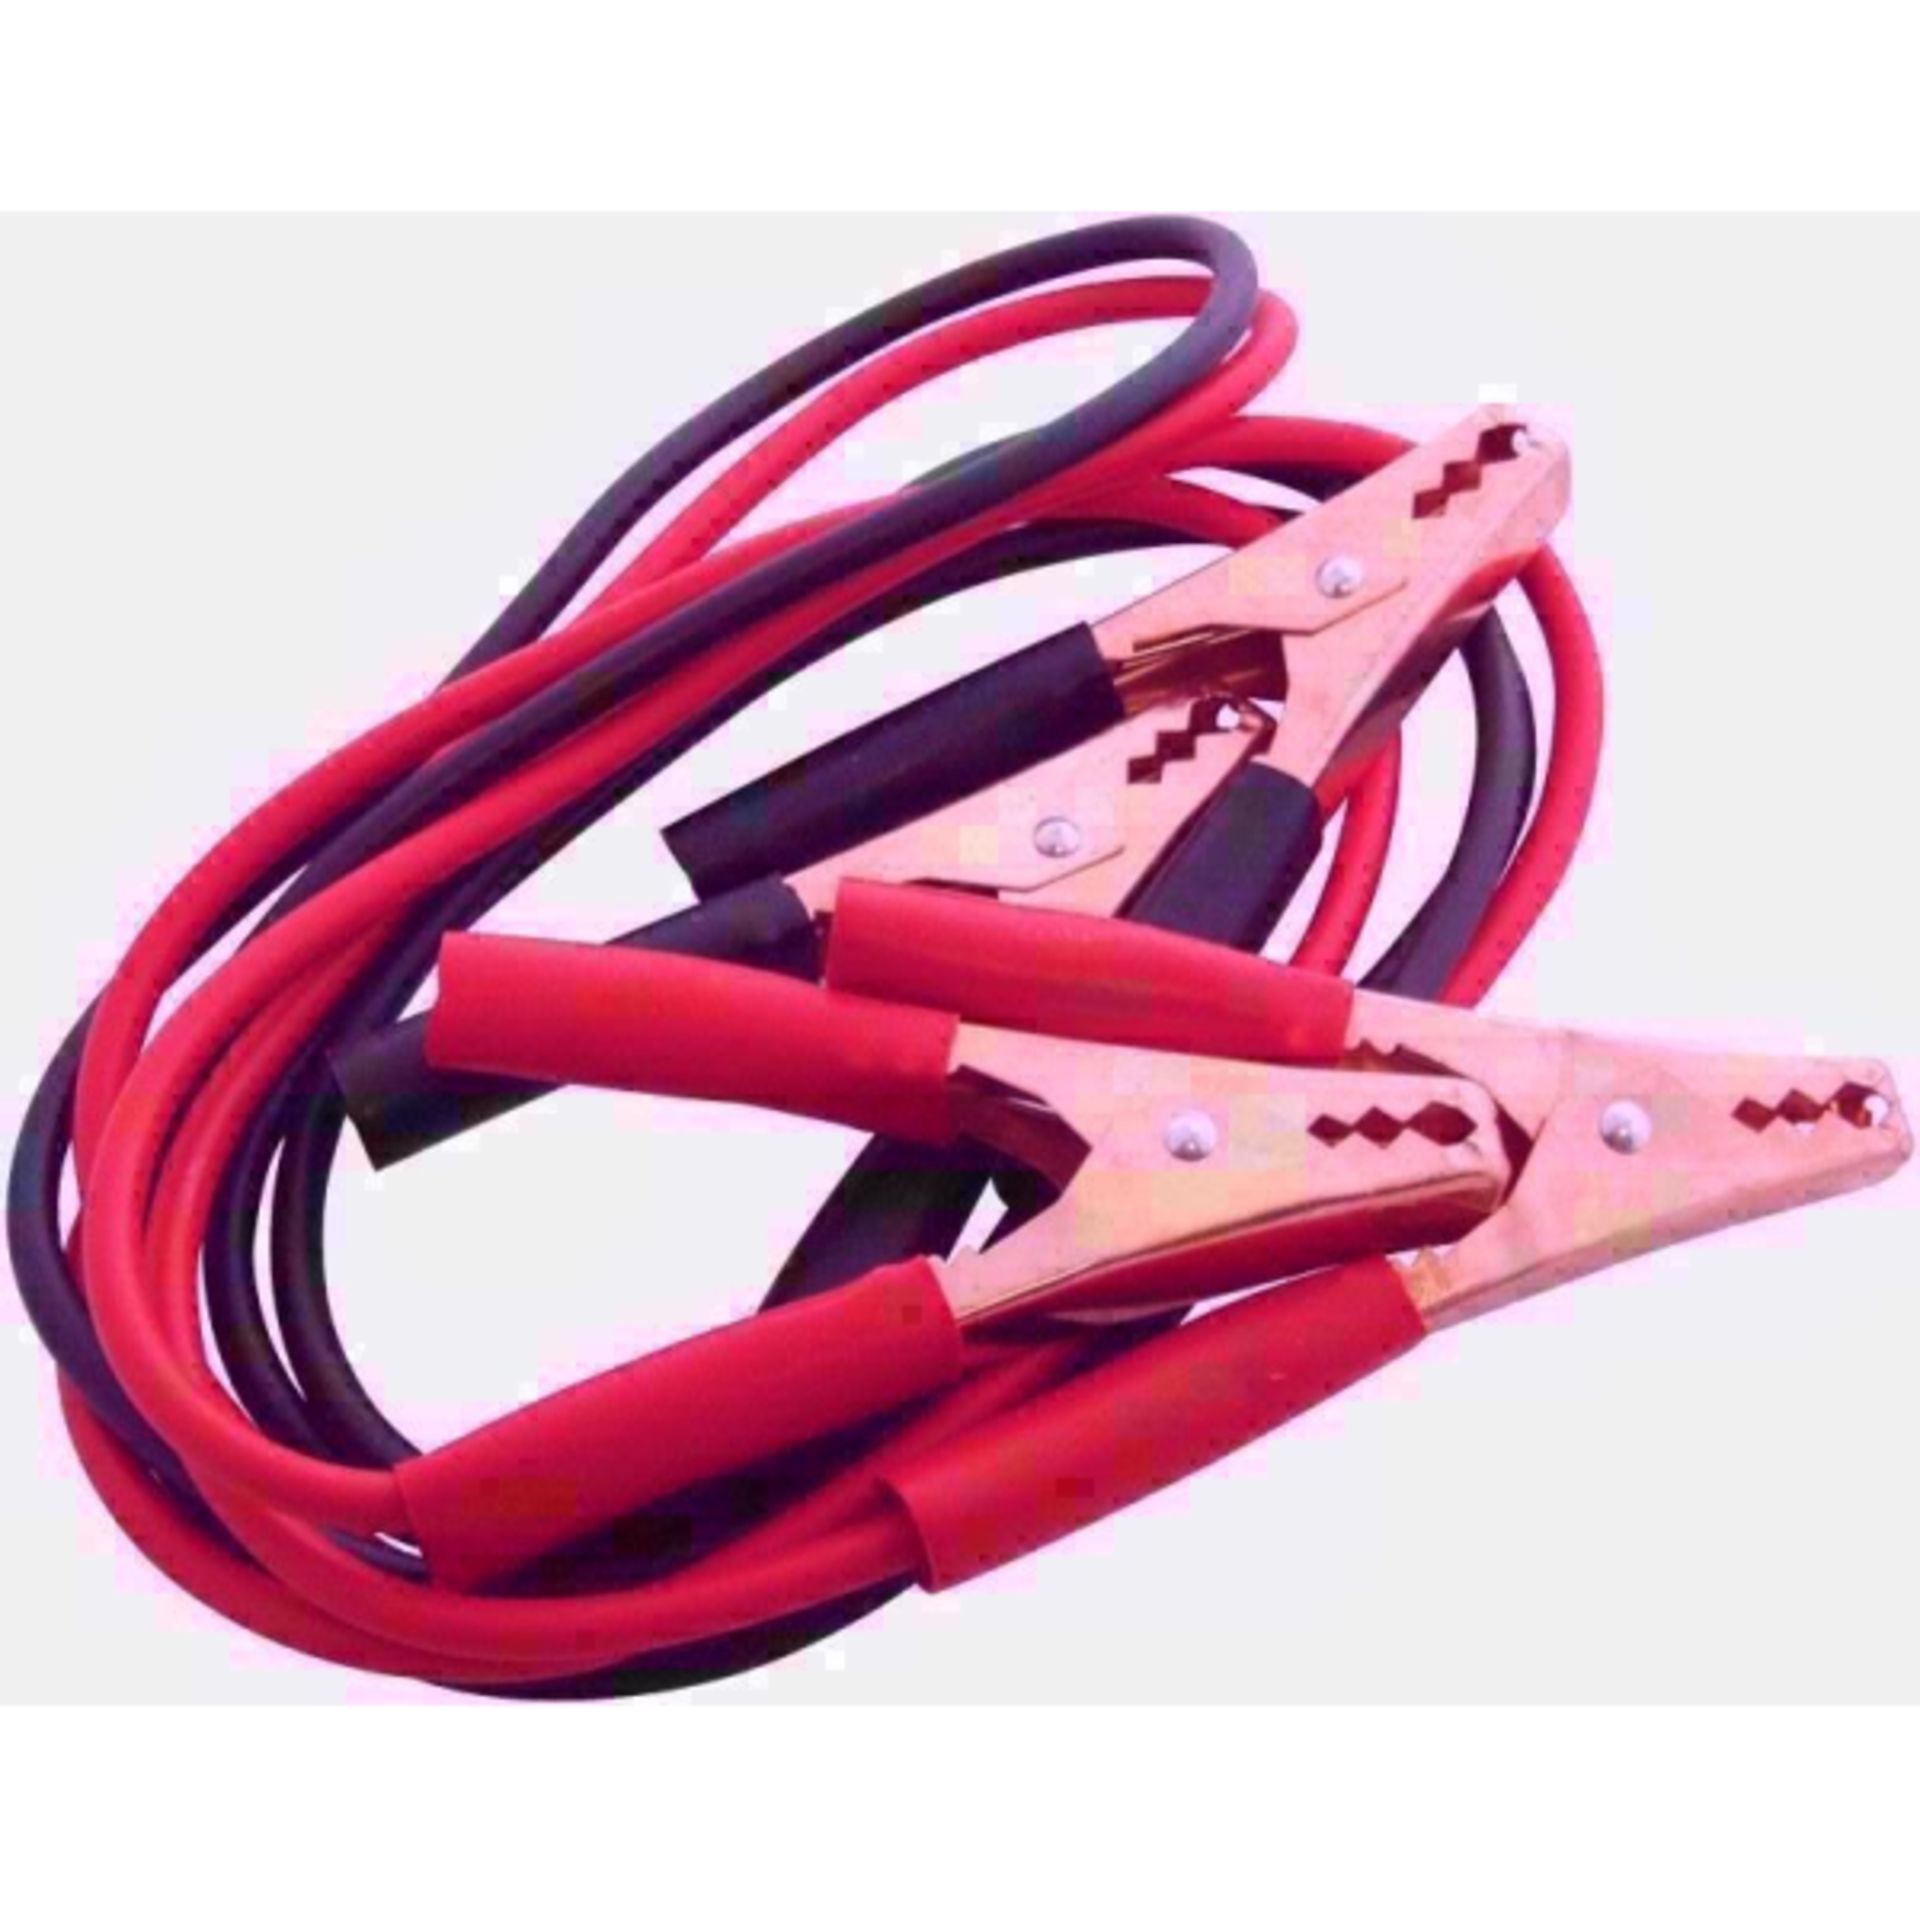 V Brand New 800amp Booster Cable Jump Leads